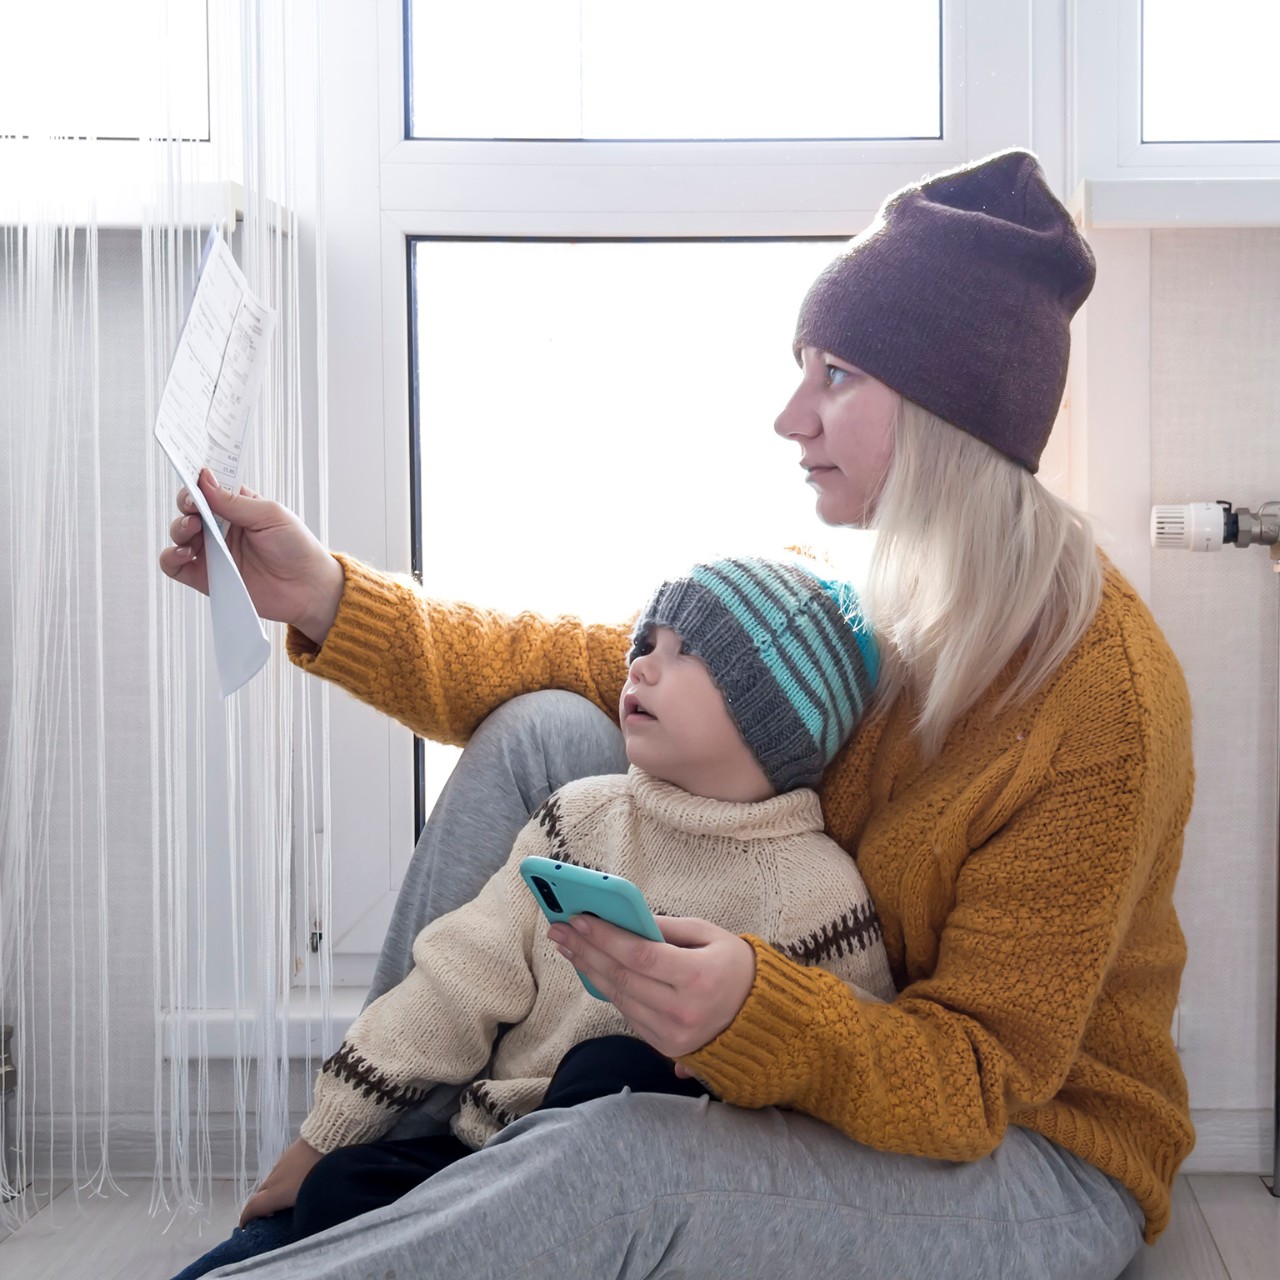 .A mother with a small child in a yellow sweater and hats is counting money and thinking how to pay bills and taxes, near a heater with a thermostat.